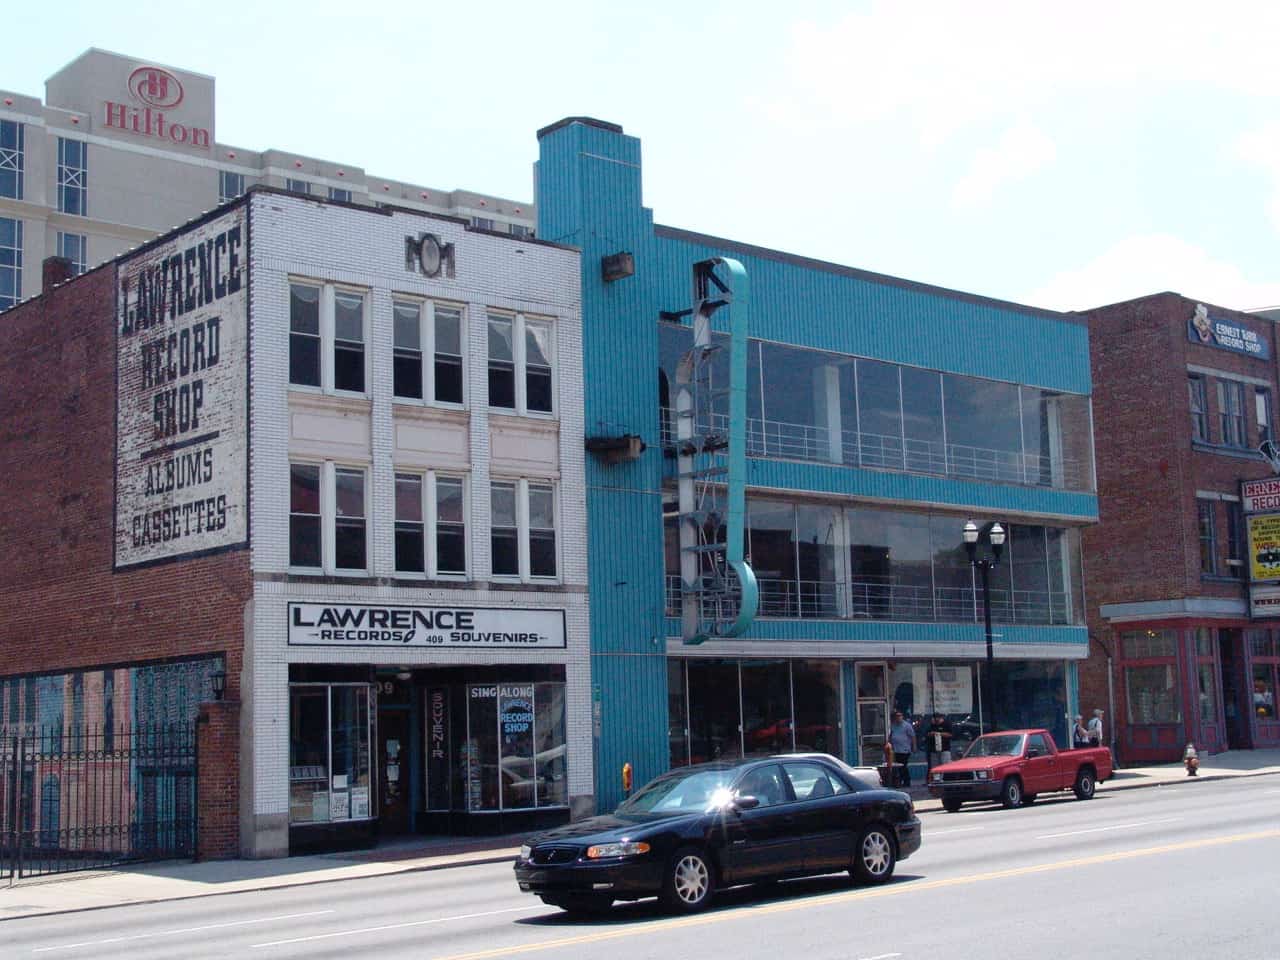 Lower Broadway in 2006 in Nashville, Tennessee